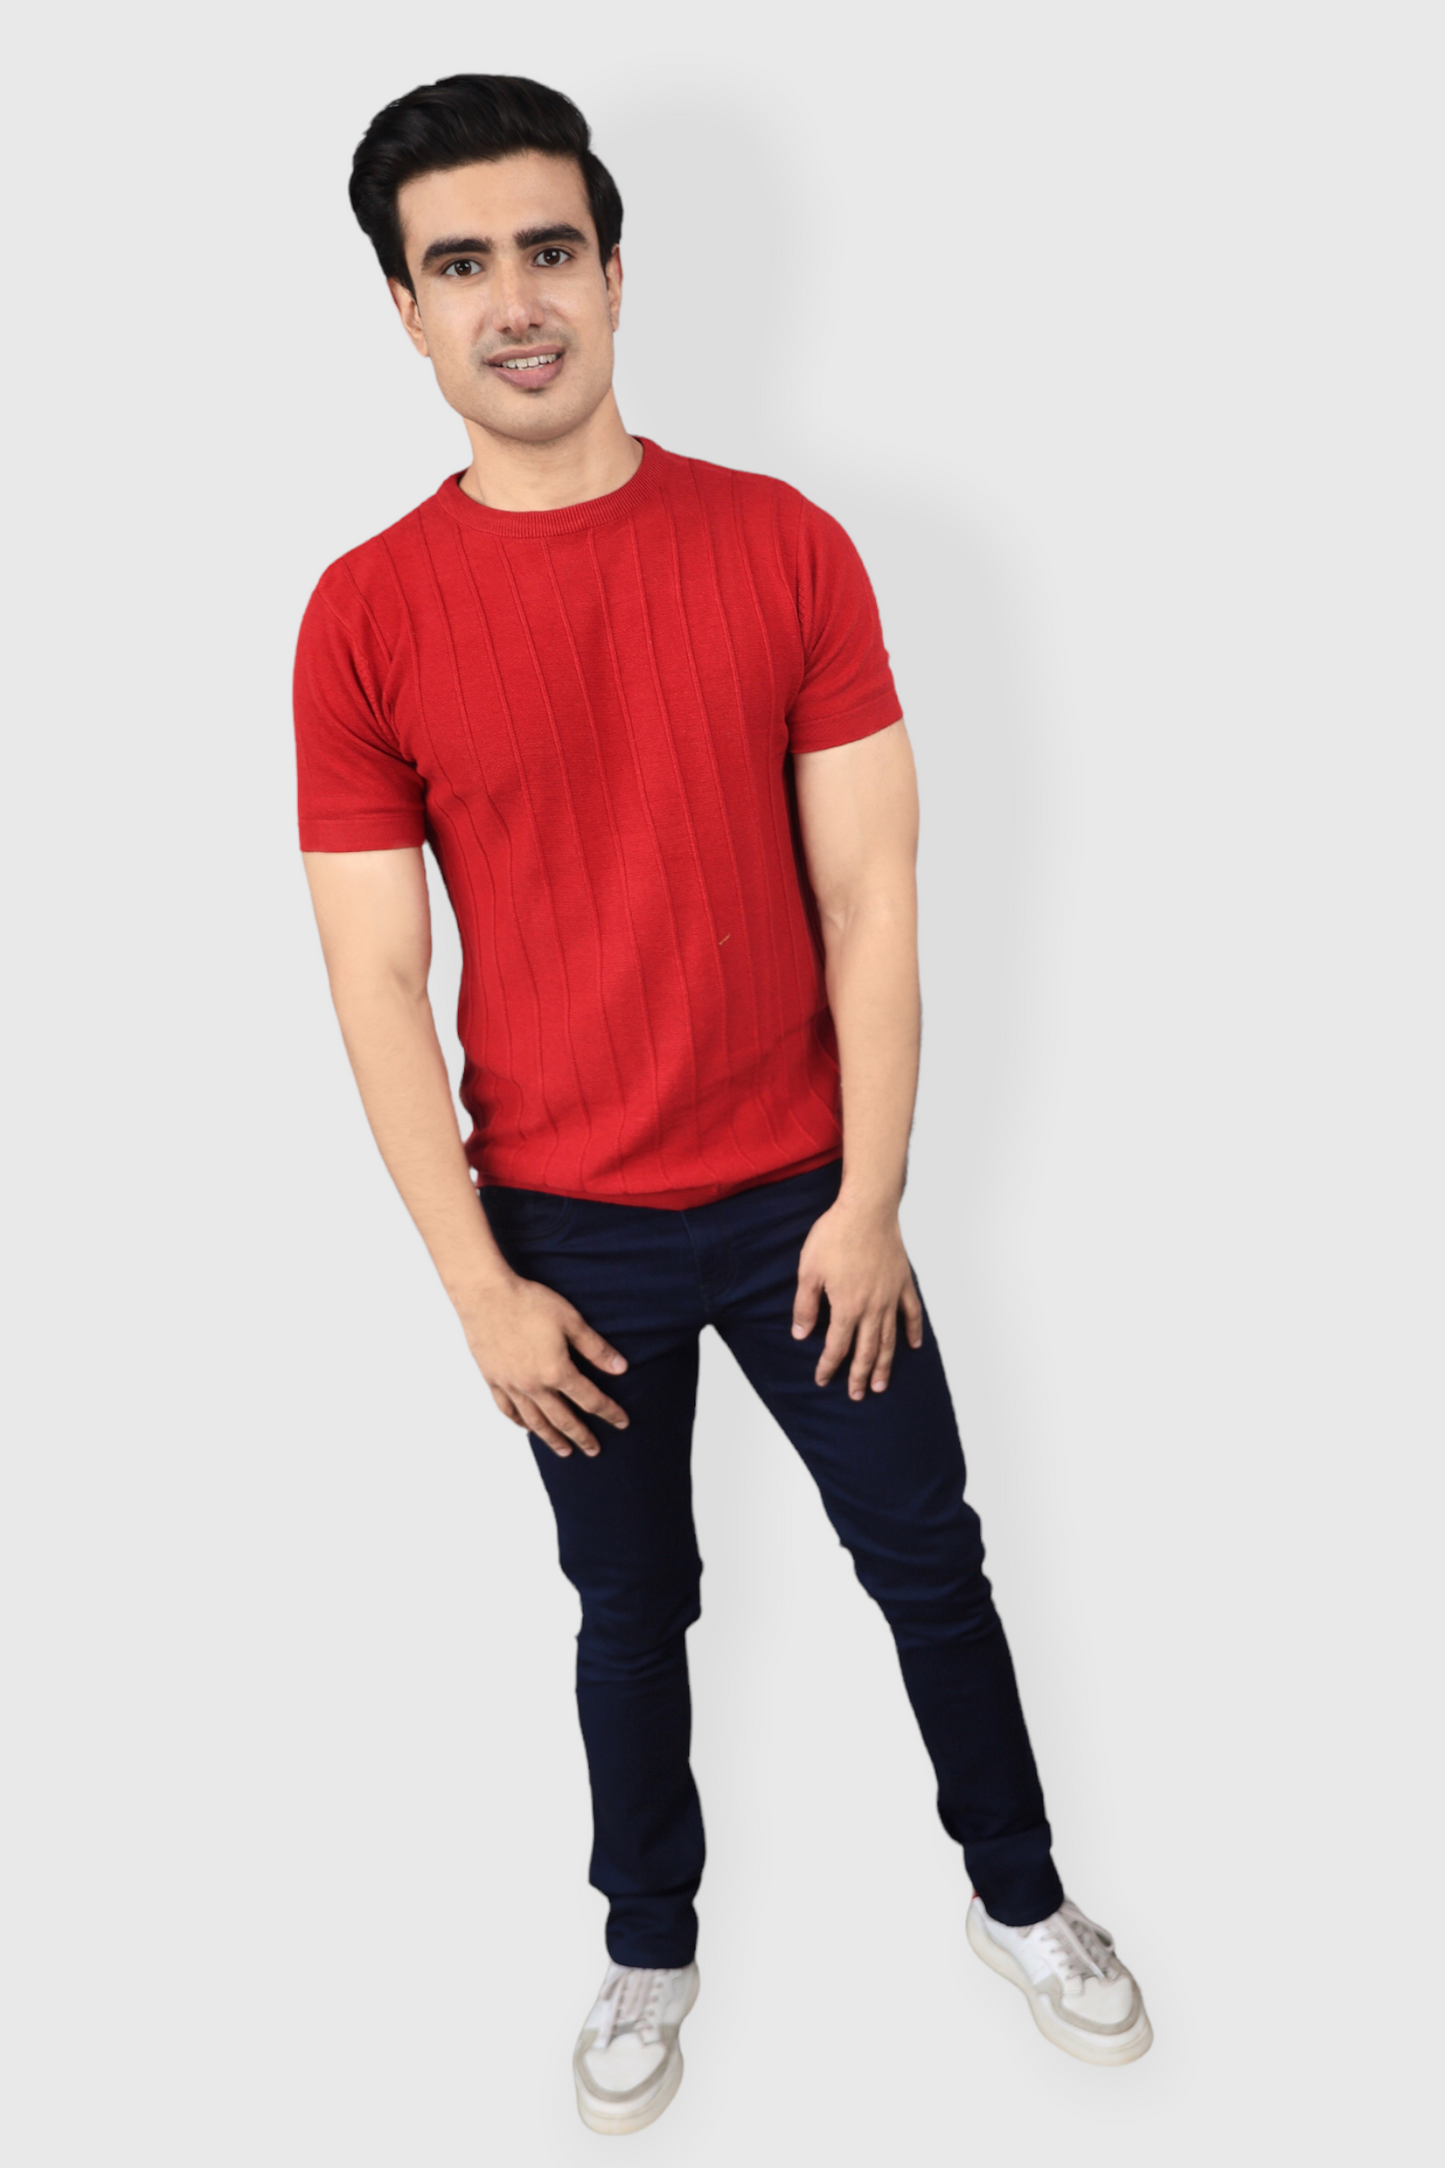 Red Half Sleeve Flat Knit self striped Round neck T-Shirt for men